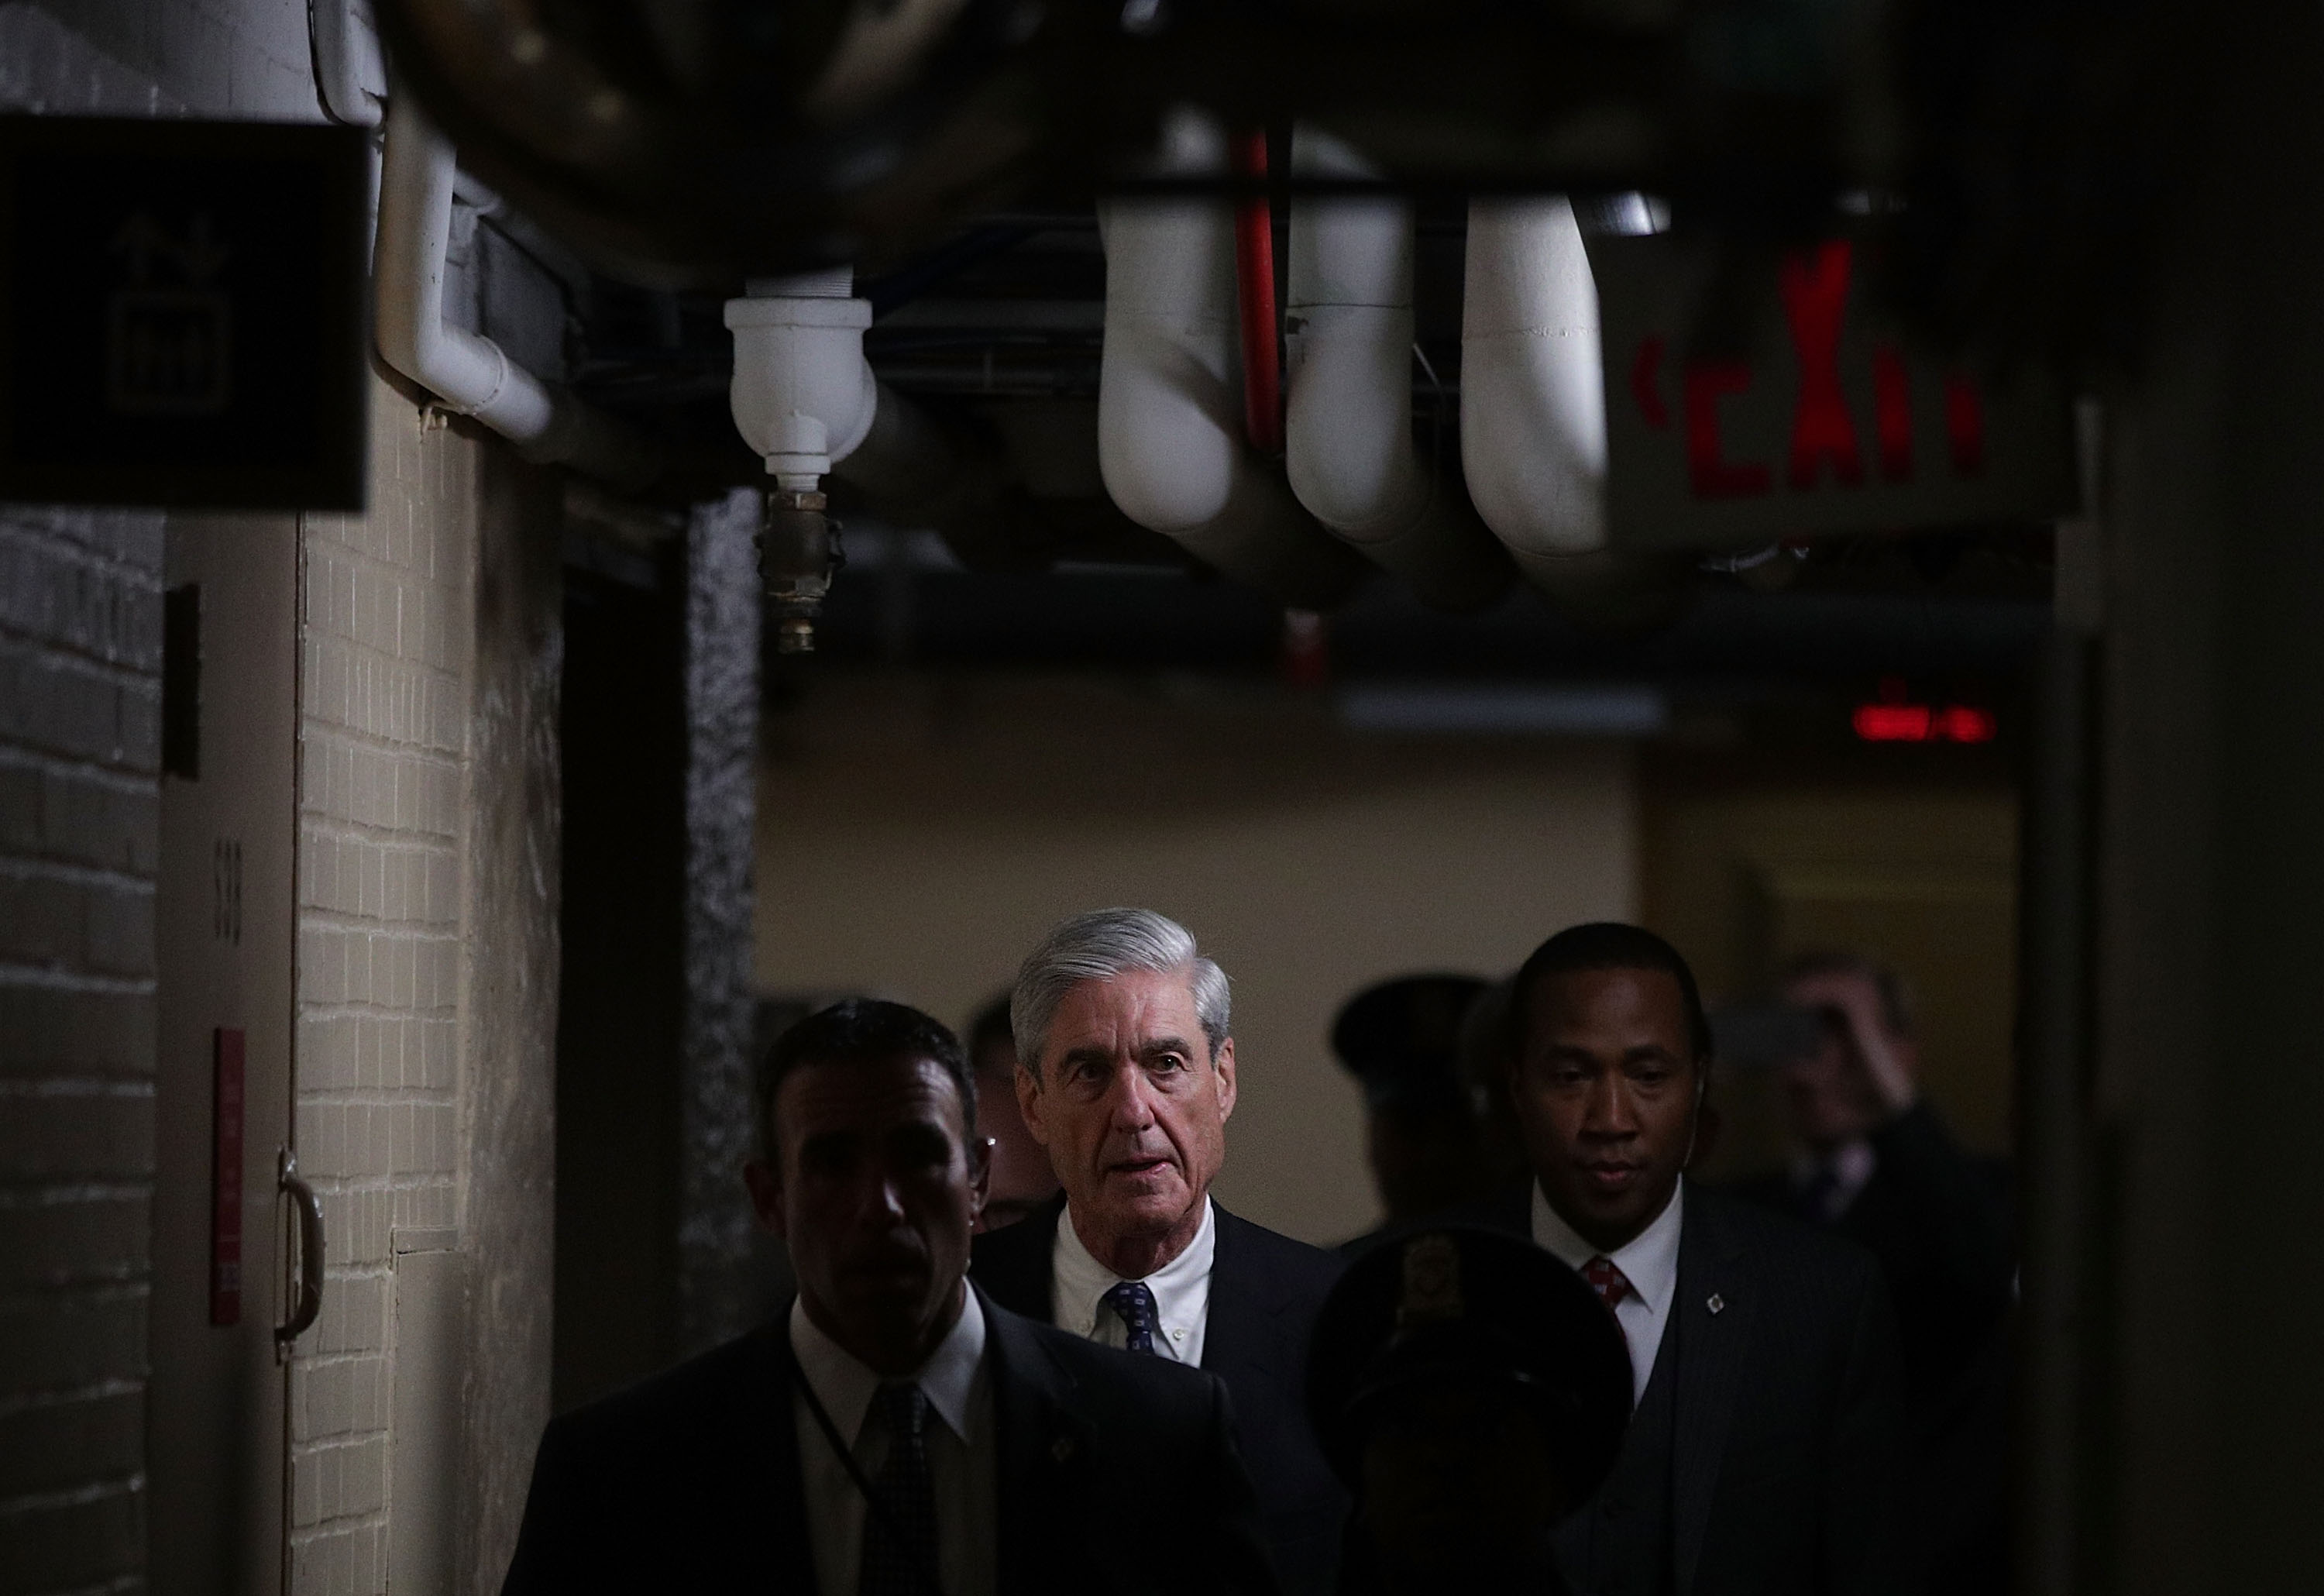 Special counsel Robert Mueller leaves after a closed meeting with members of the Senate Judiciary Committee June 21, 2017 at the Capitol in Washington, DC. (Alex Wong&mdash;Getty Images)